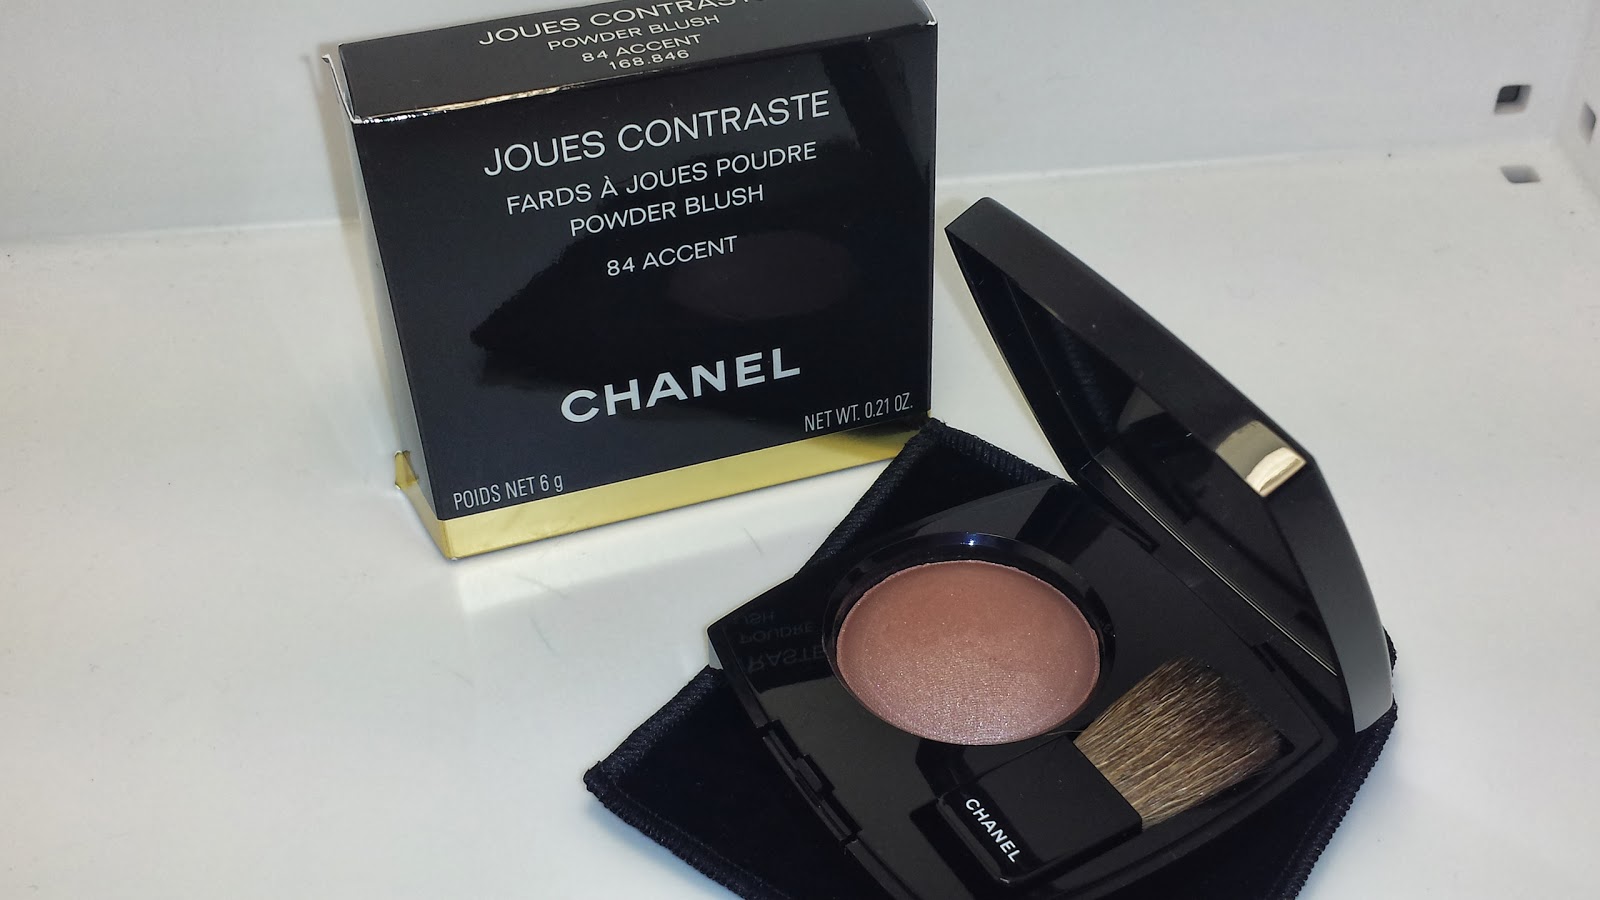 CHANEL Joues Contraste #84 Accent (LE) – Holiday 2013